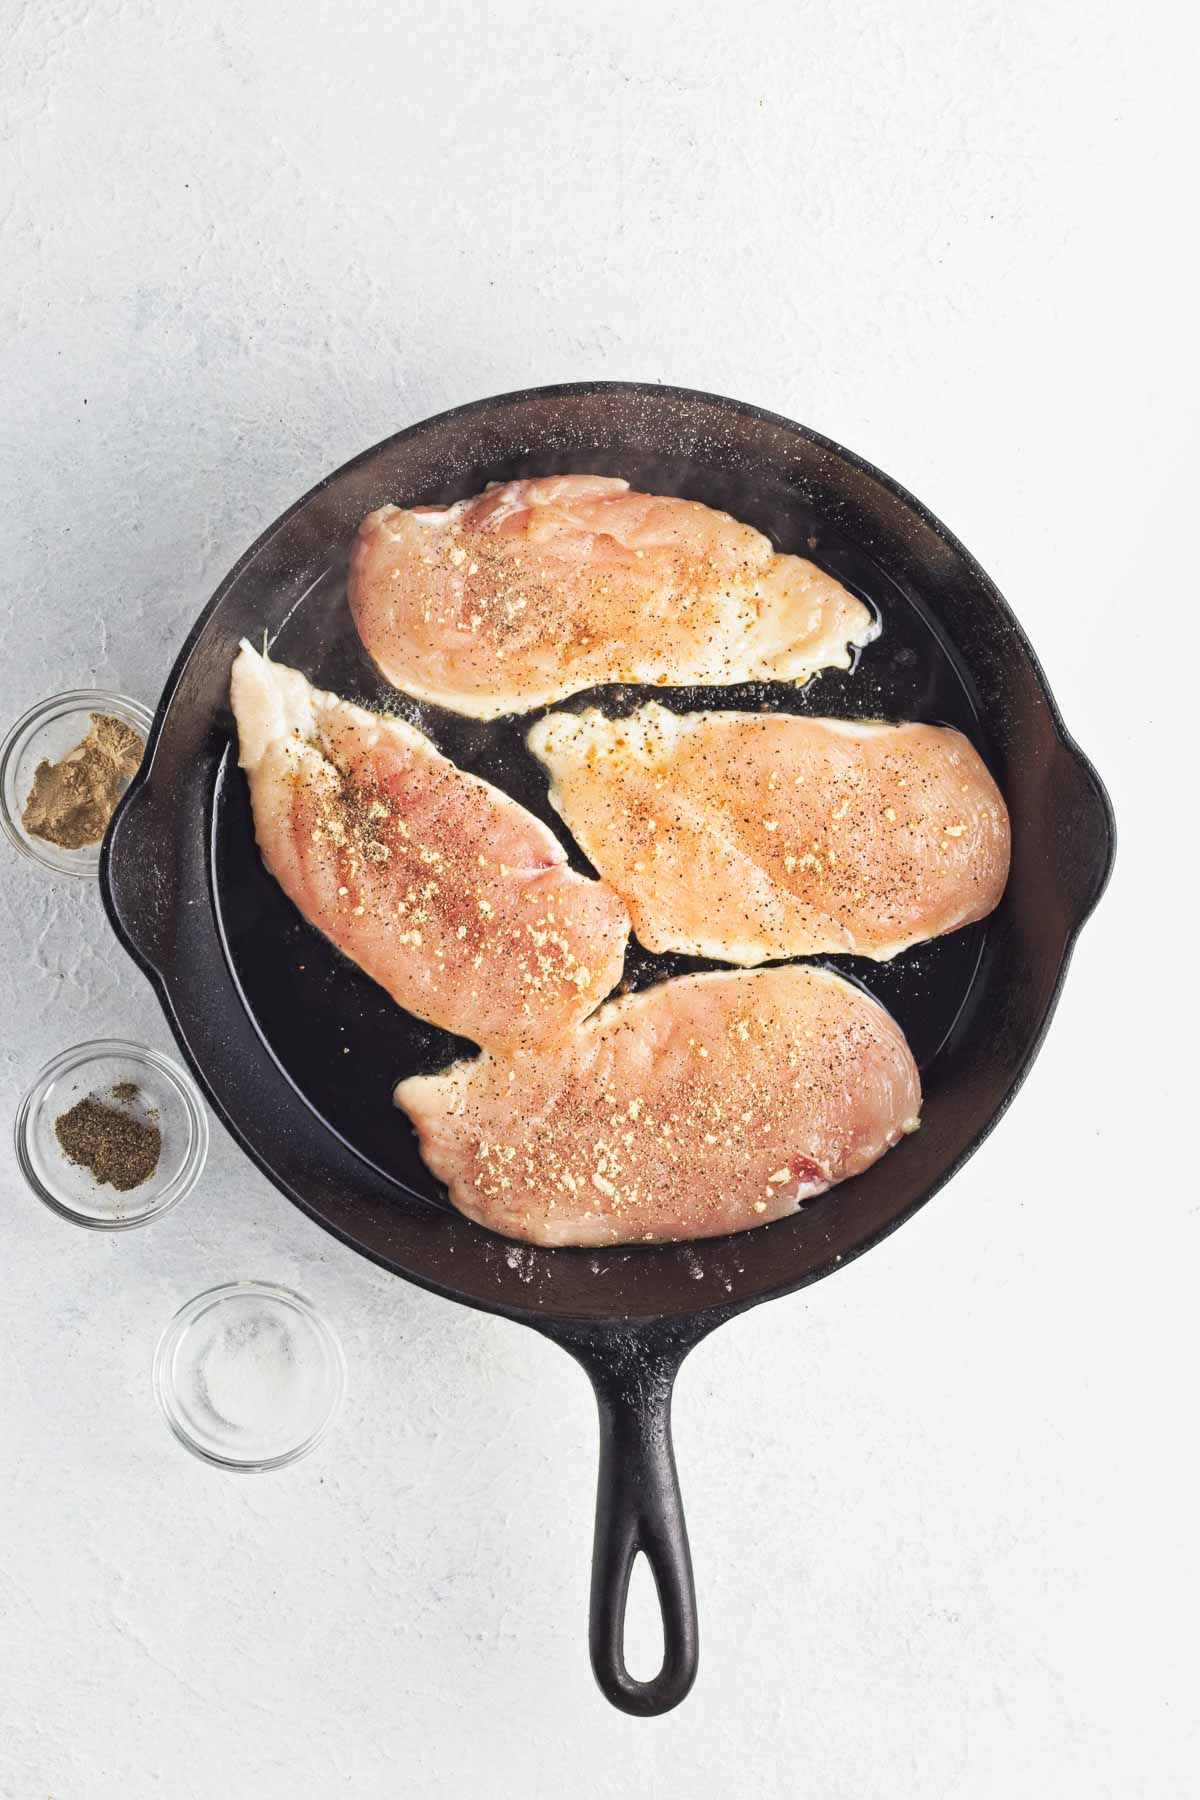 Thin-sliced chicken breasts cooking in a skillet, seasoned on top